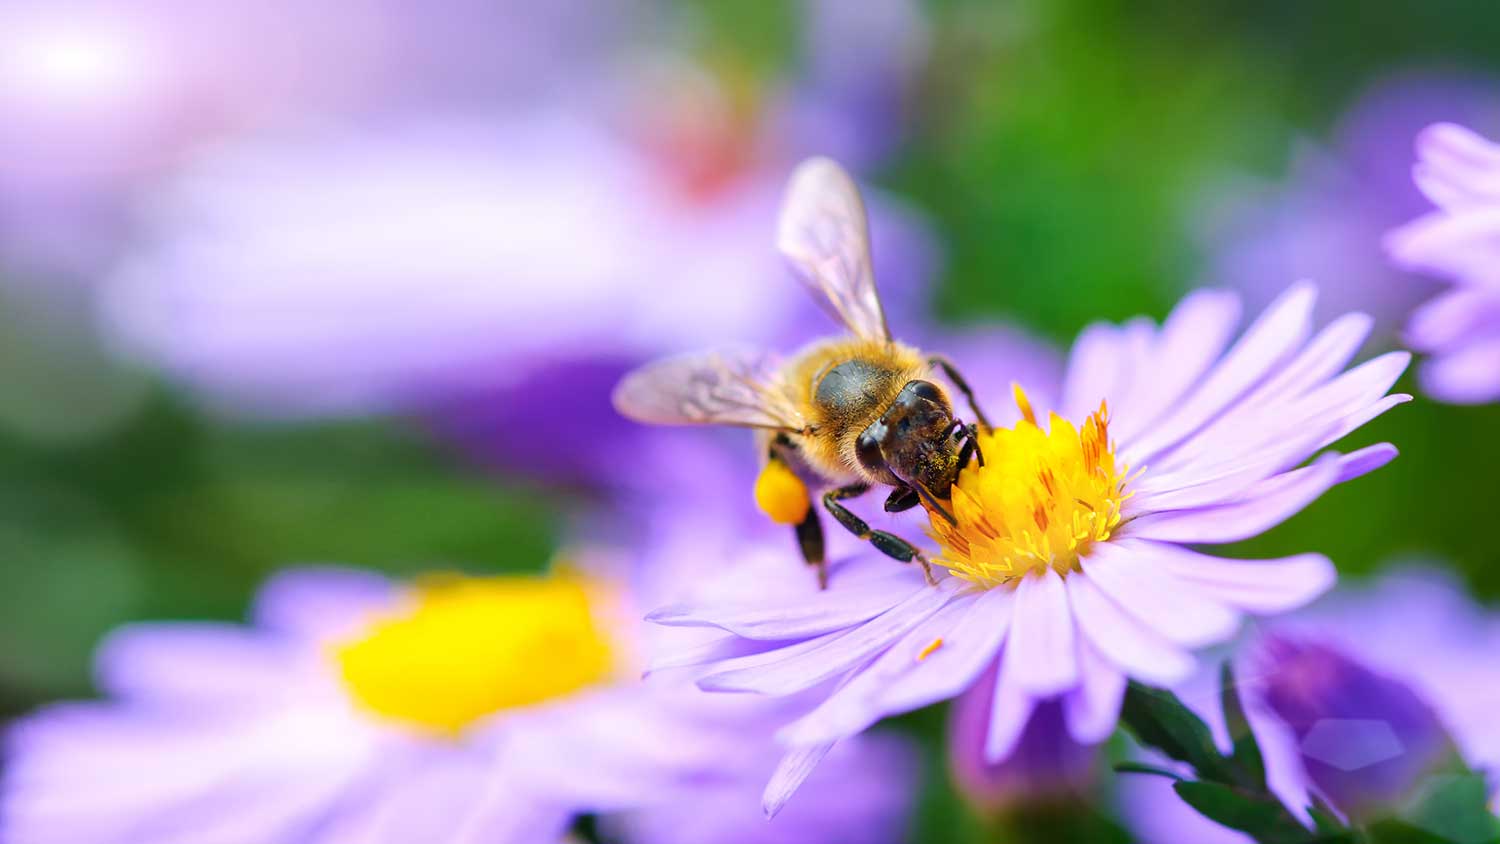 Bumble bee on a purple flower